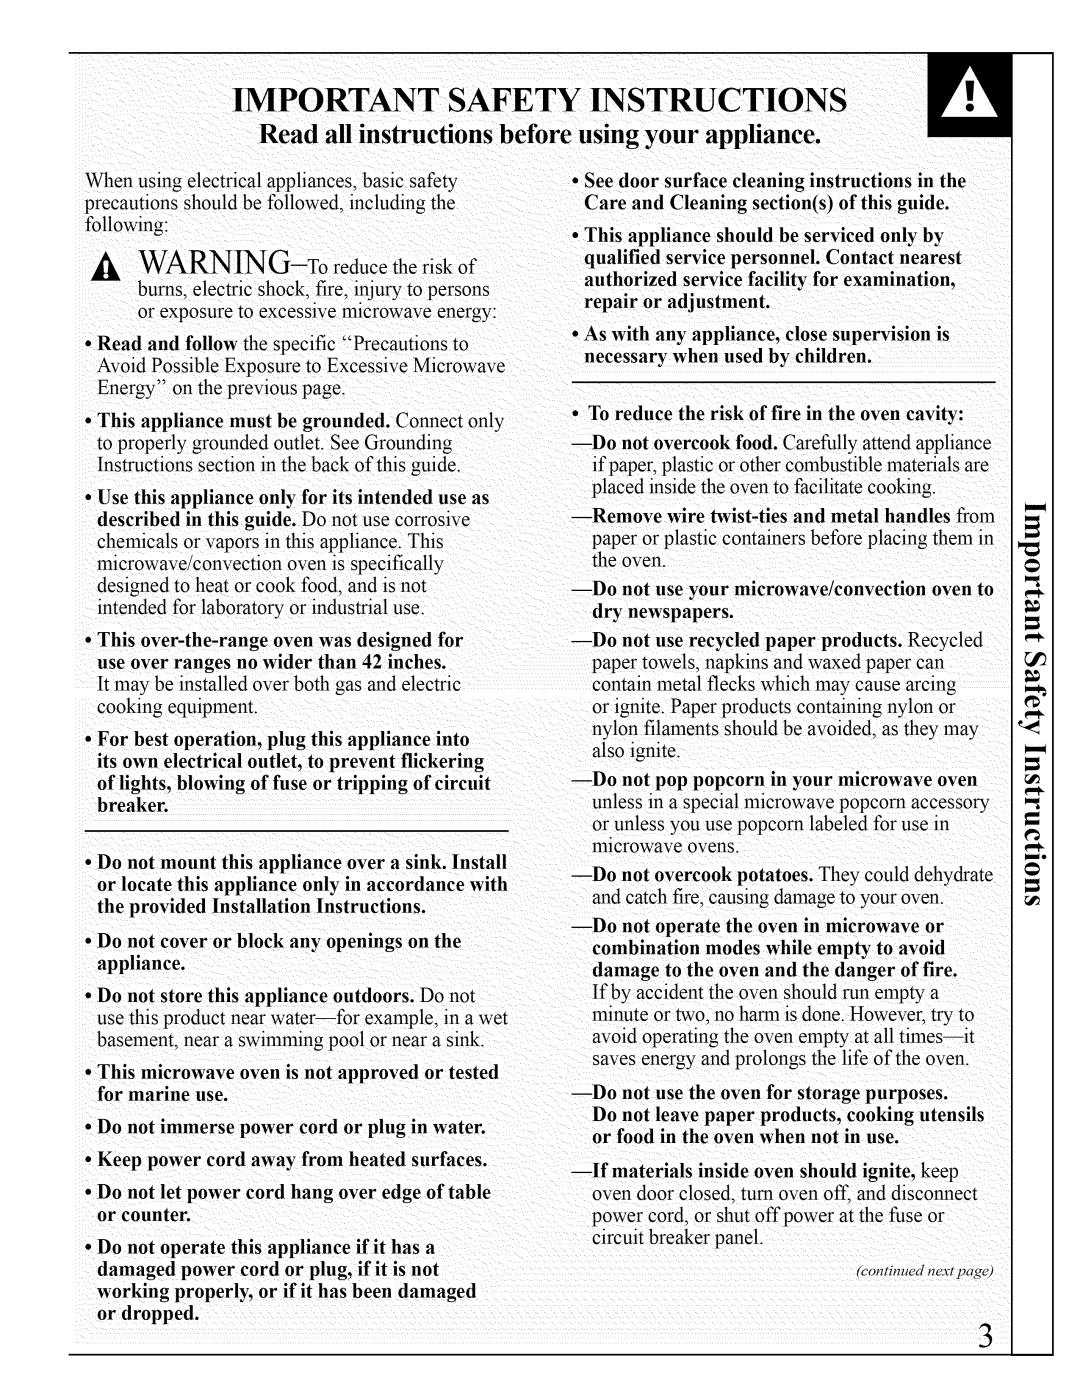 GE JVM290 manual Important Safety Instructions, Read all instructions before using your appliance 